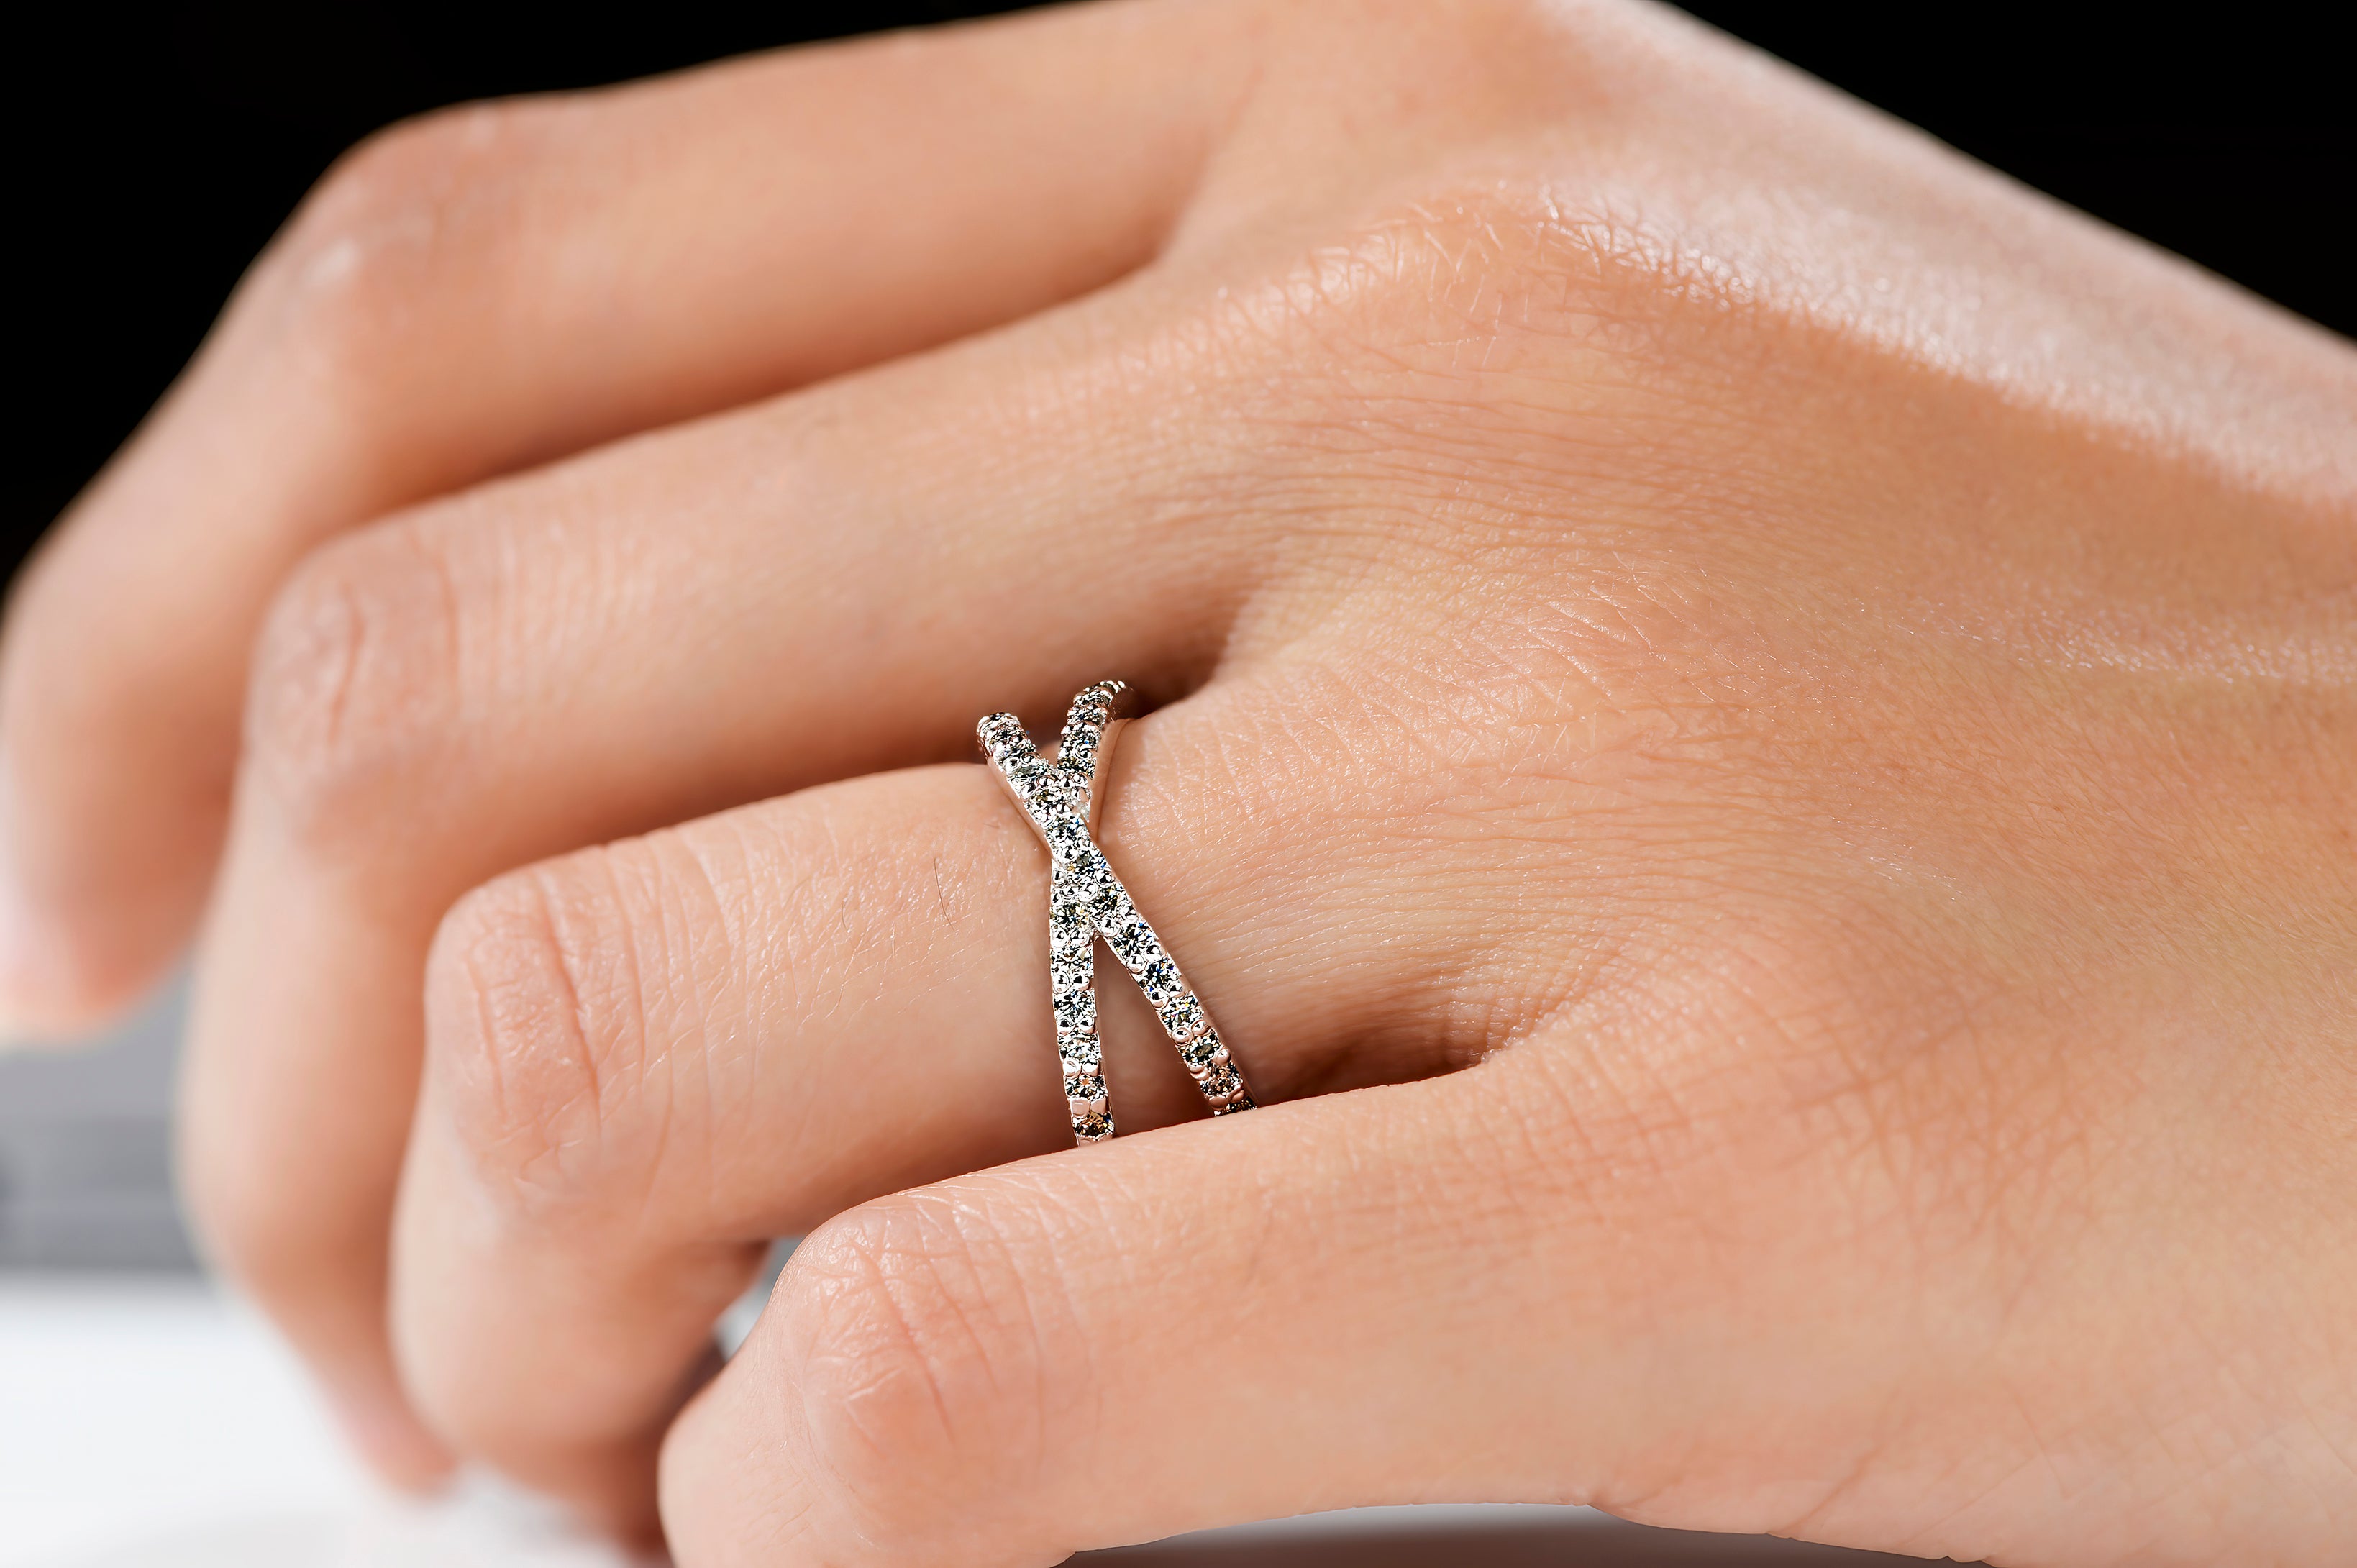 Criss-Cross Moissanite Ring in Sterling Silver 925  worn by a model gracefully